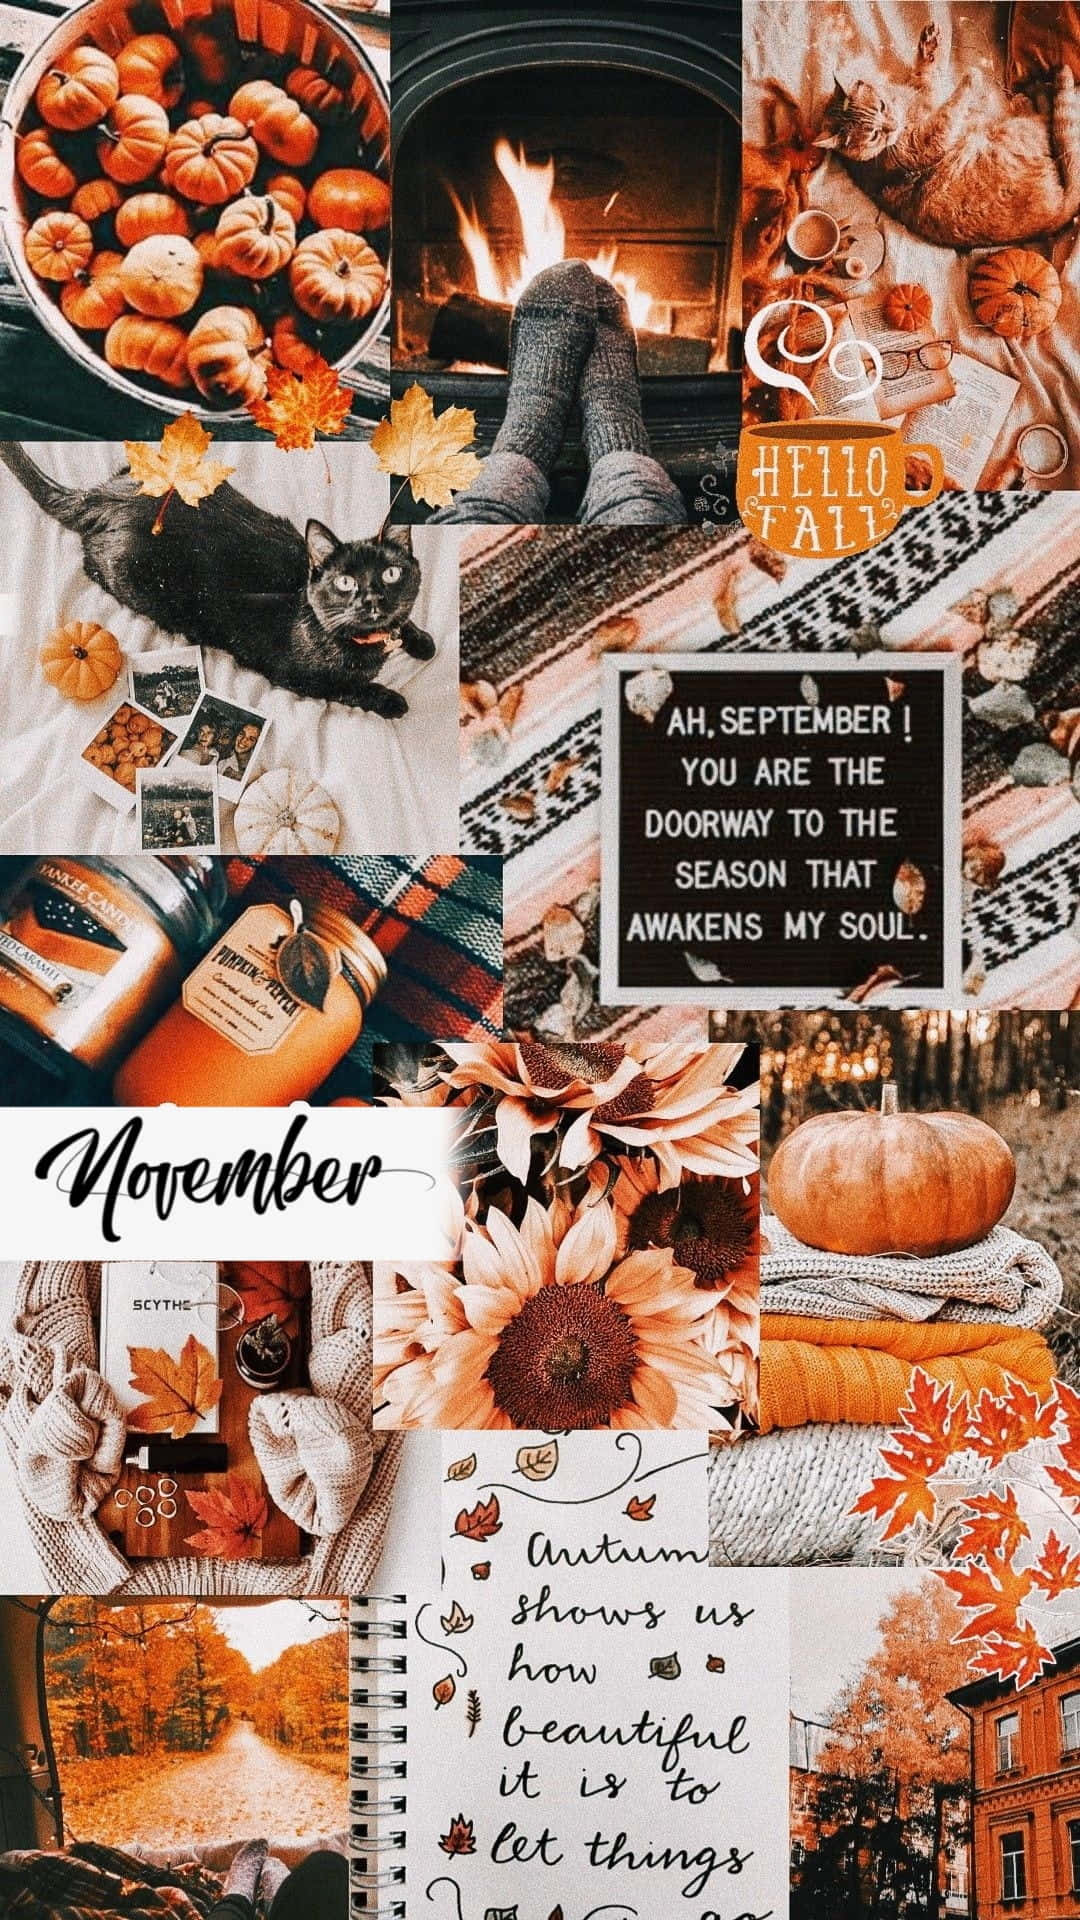 Welcome to the cozy month of November! Wallpaper